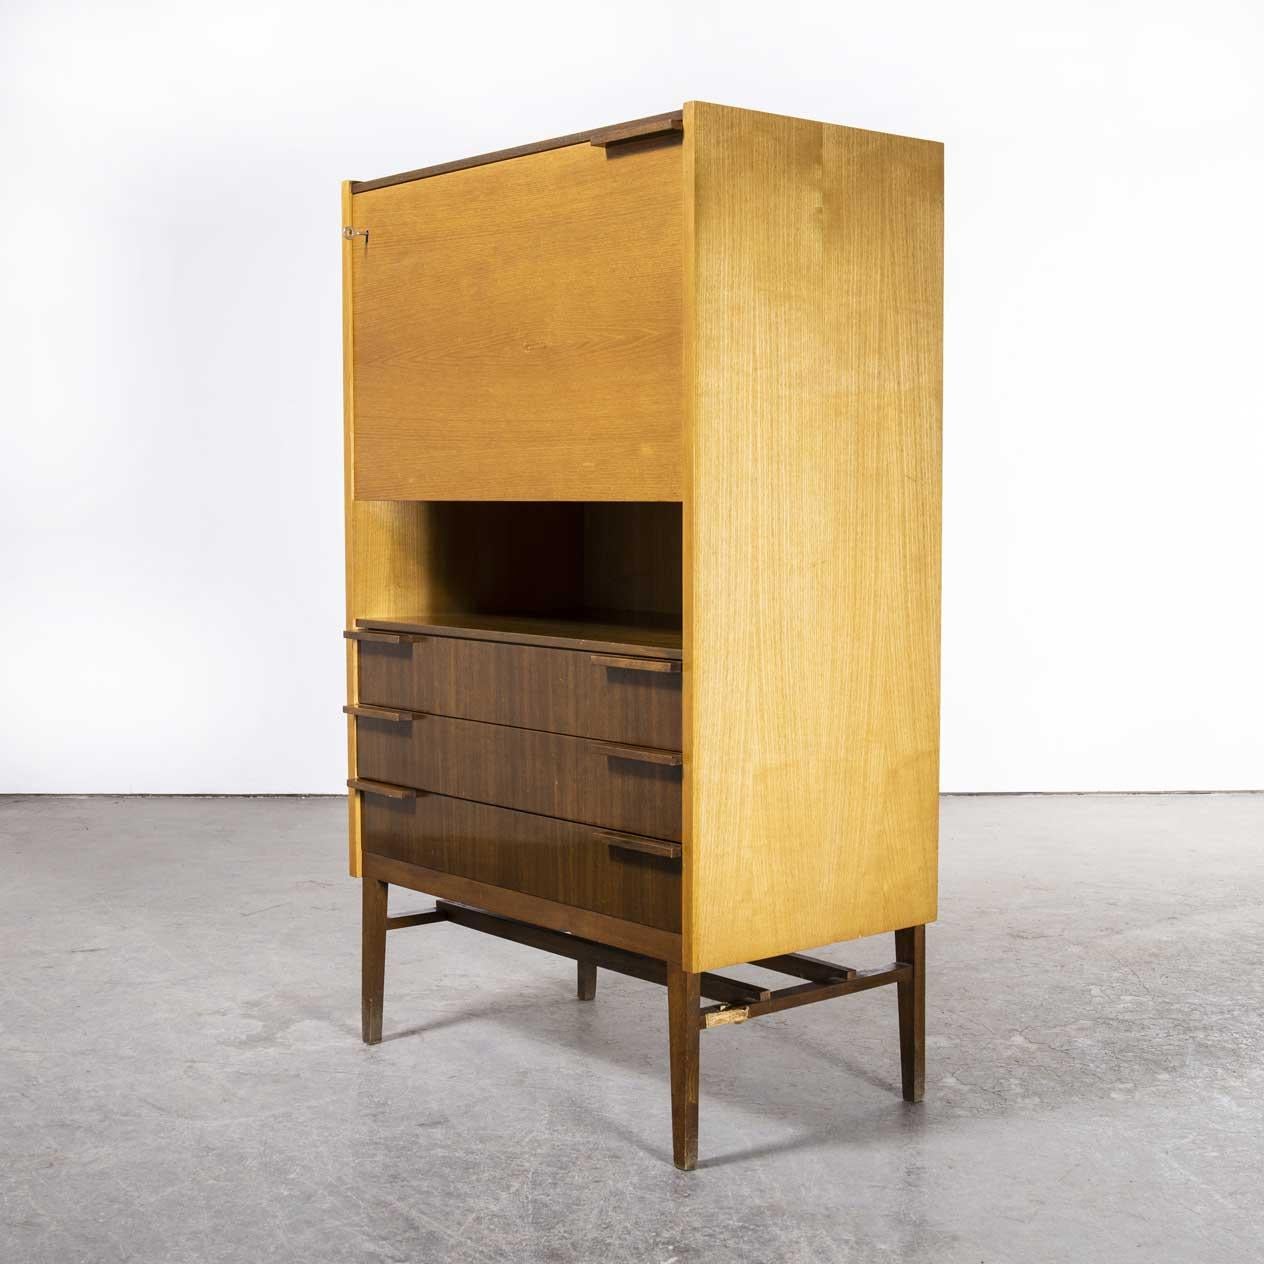 1960's Large Mid Century Desk -Cabinet - Up Zavody. 

Superb practical piece of mid century storage by the Czech maker Up Zavody. Czech was a large producer of high quality mid century furniture following the surge of modernism originated by the